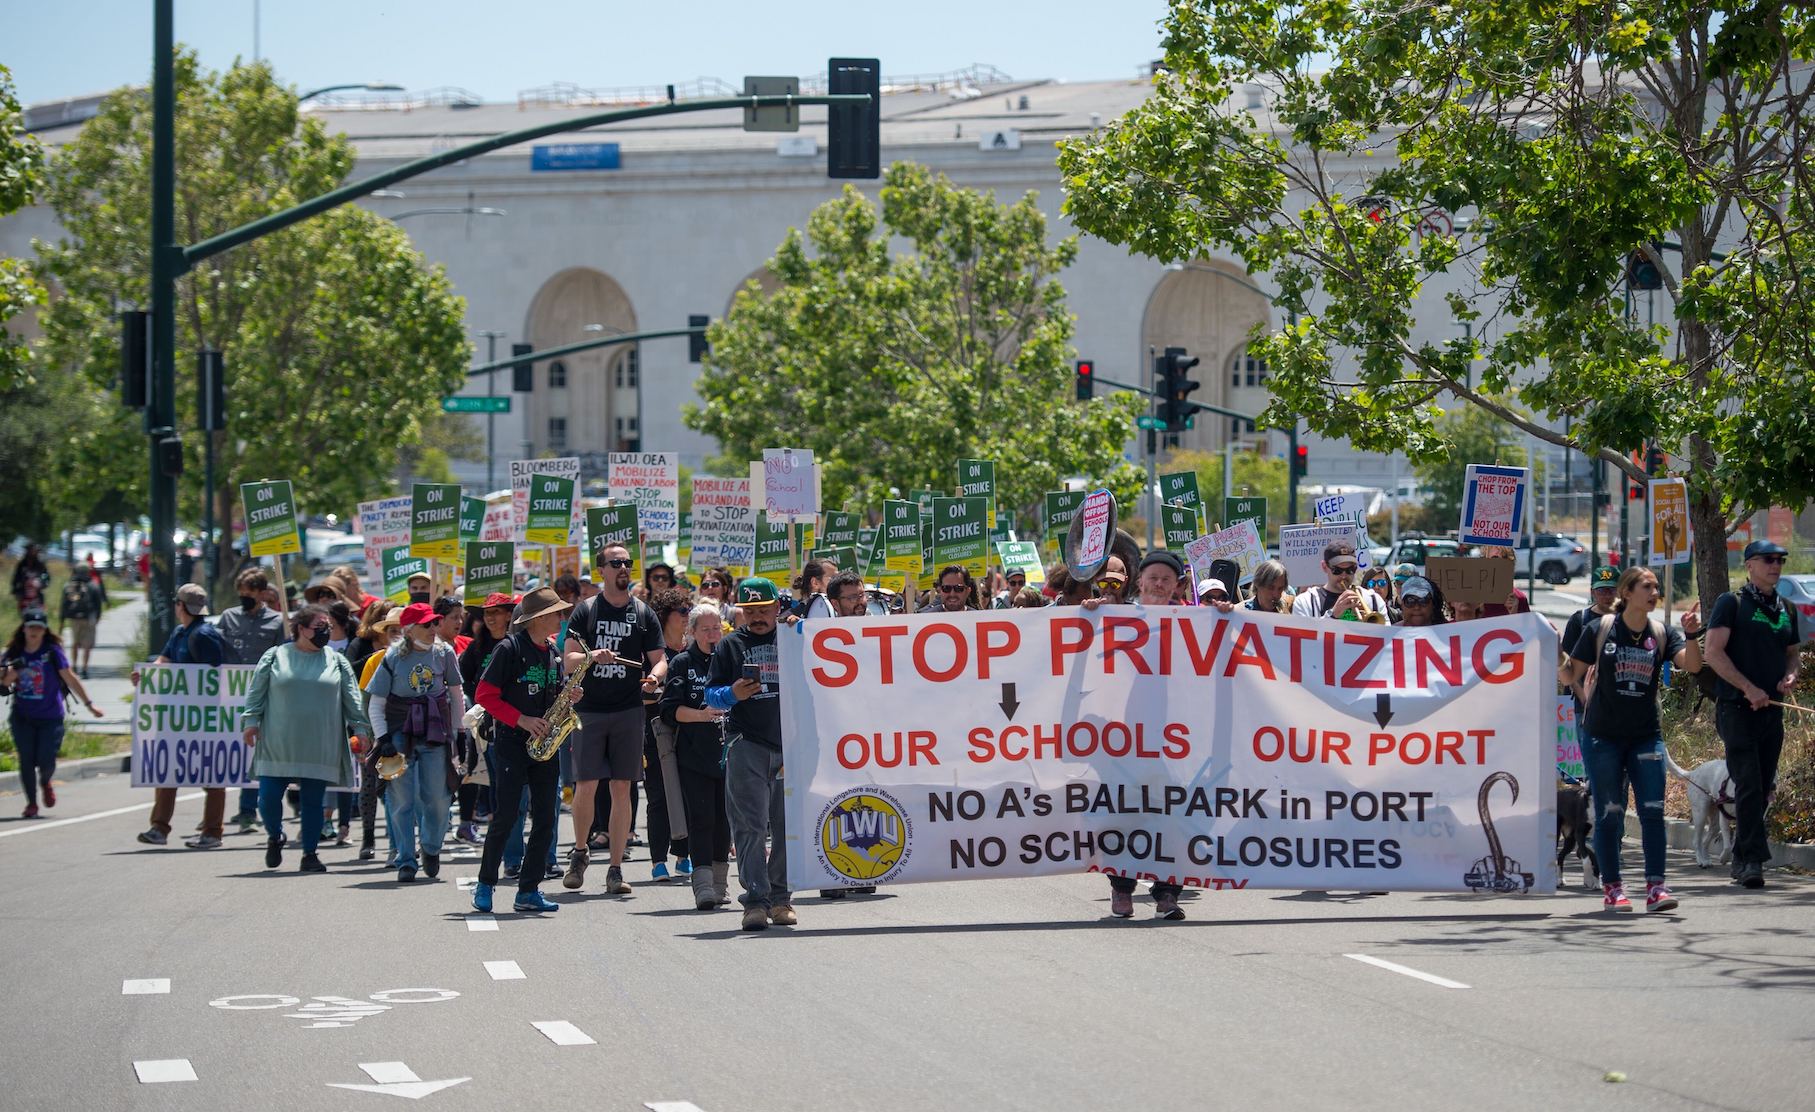 People march down a street, holding a banner that says 'Stop Privatizing Our Schools, Our Port"